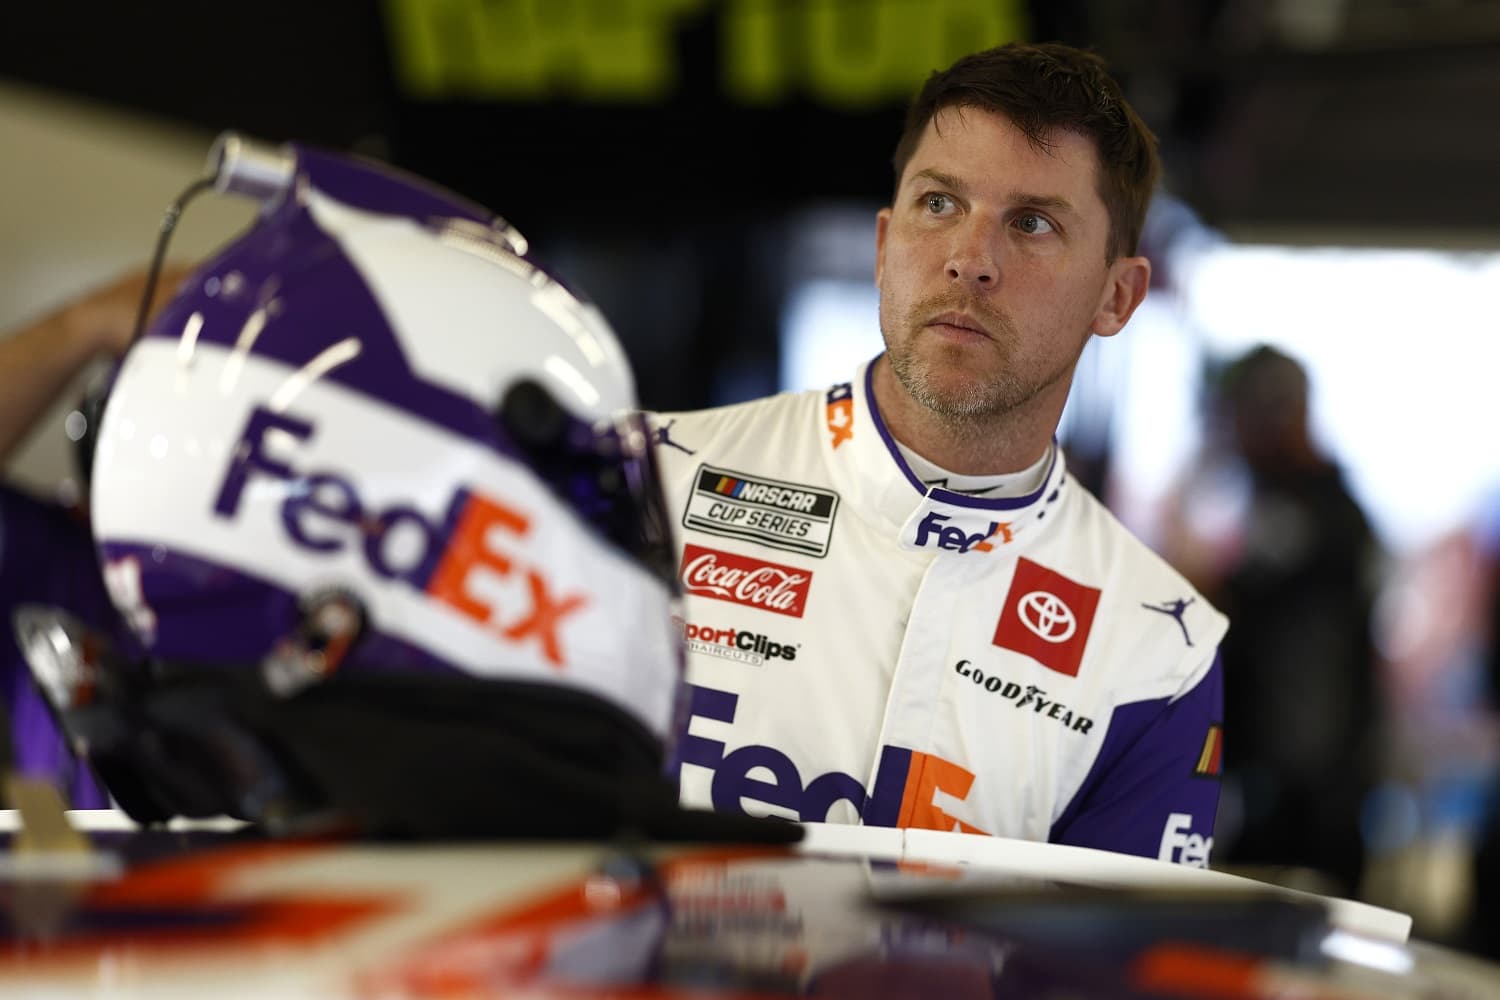 Denny Hamlin looks on in the garage area during practice for the NASCAR Cup Series Daytona 500 on Feb. 17, 2023.